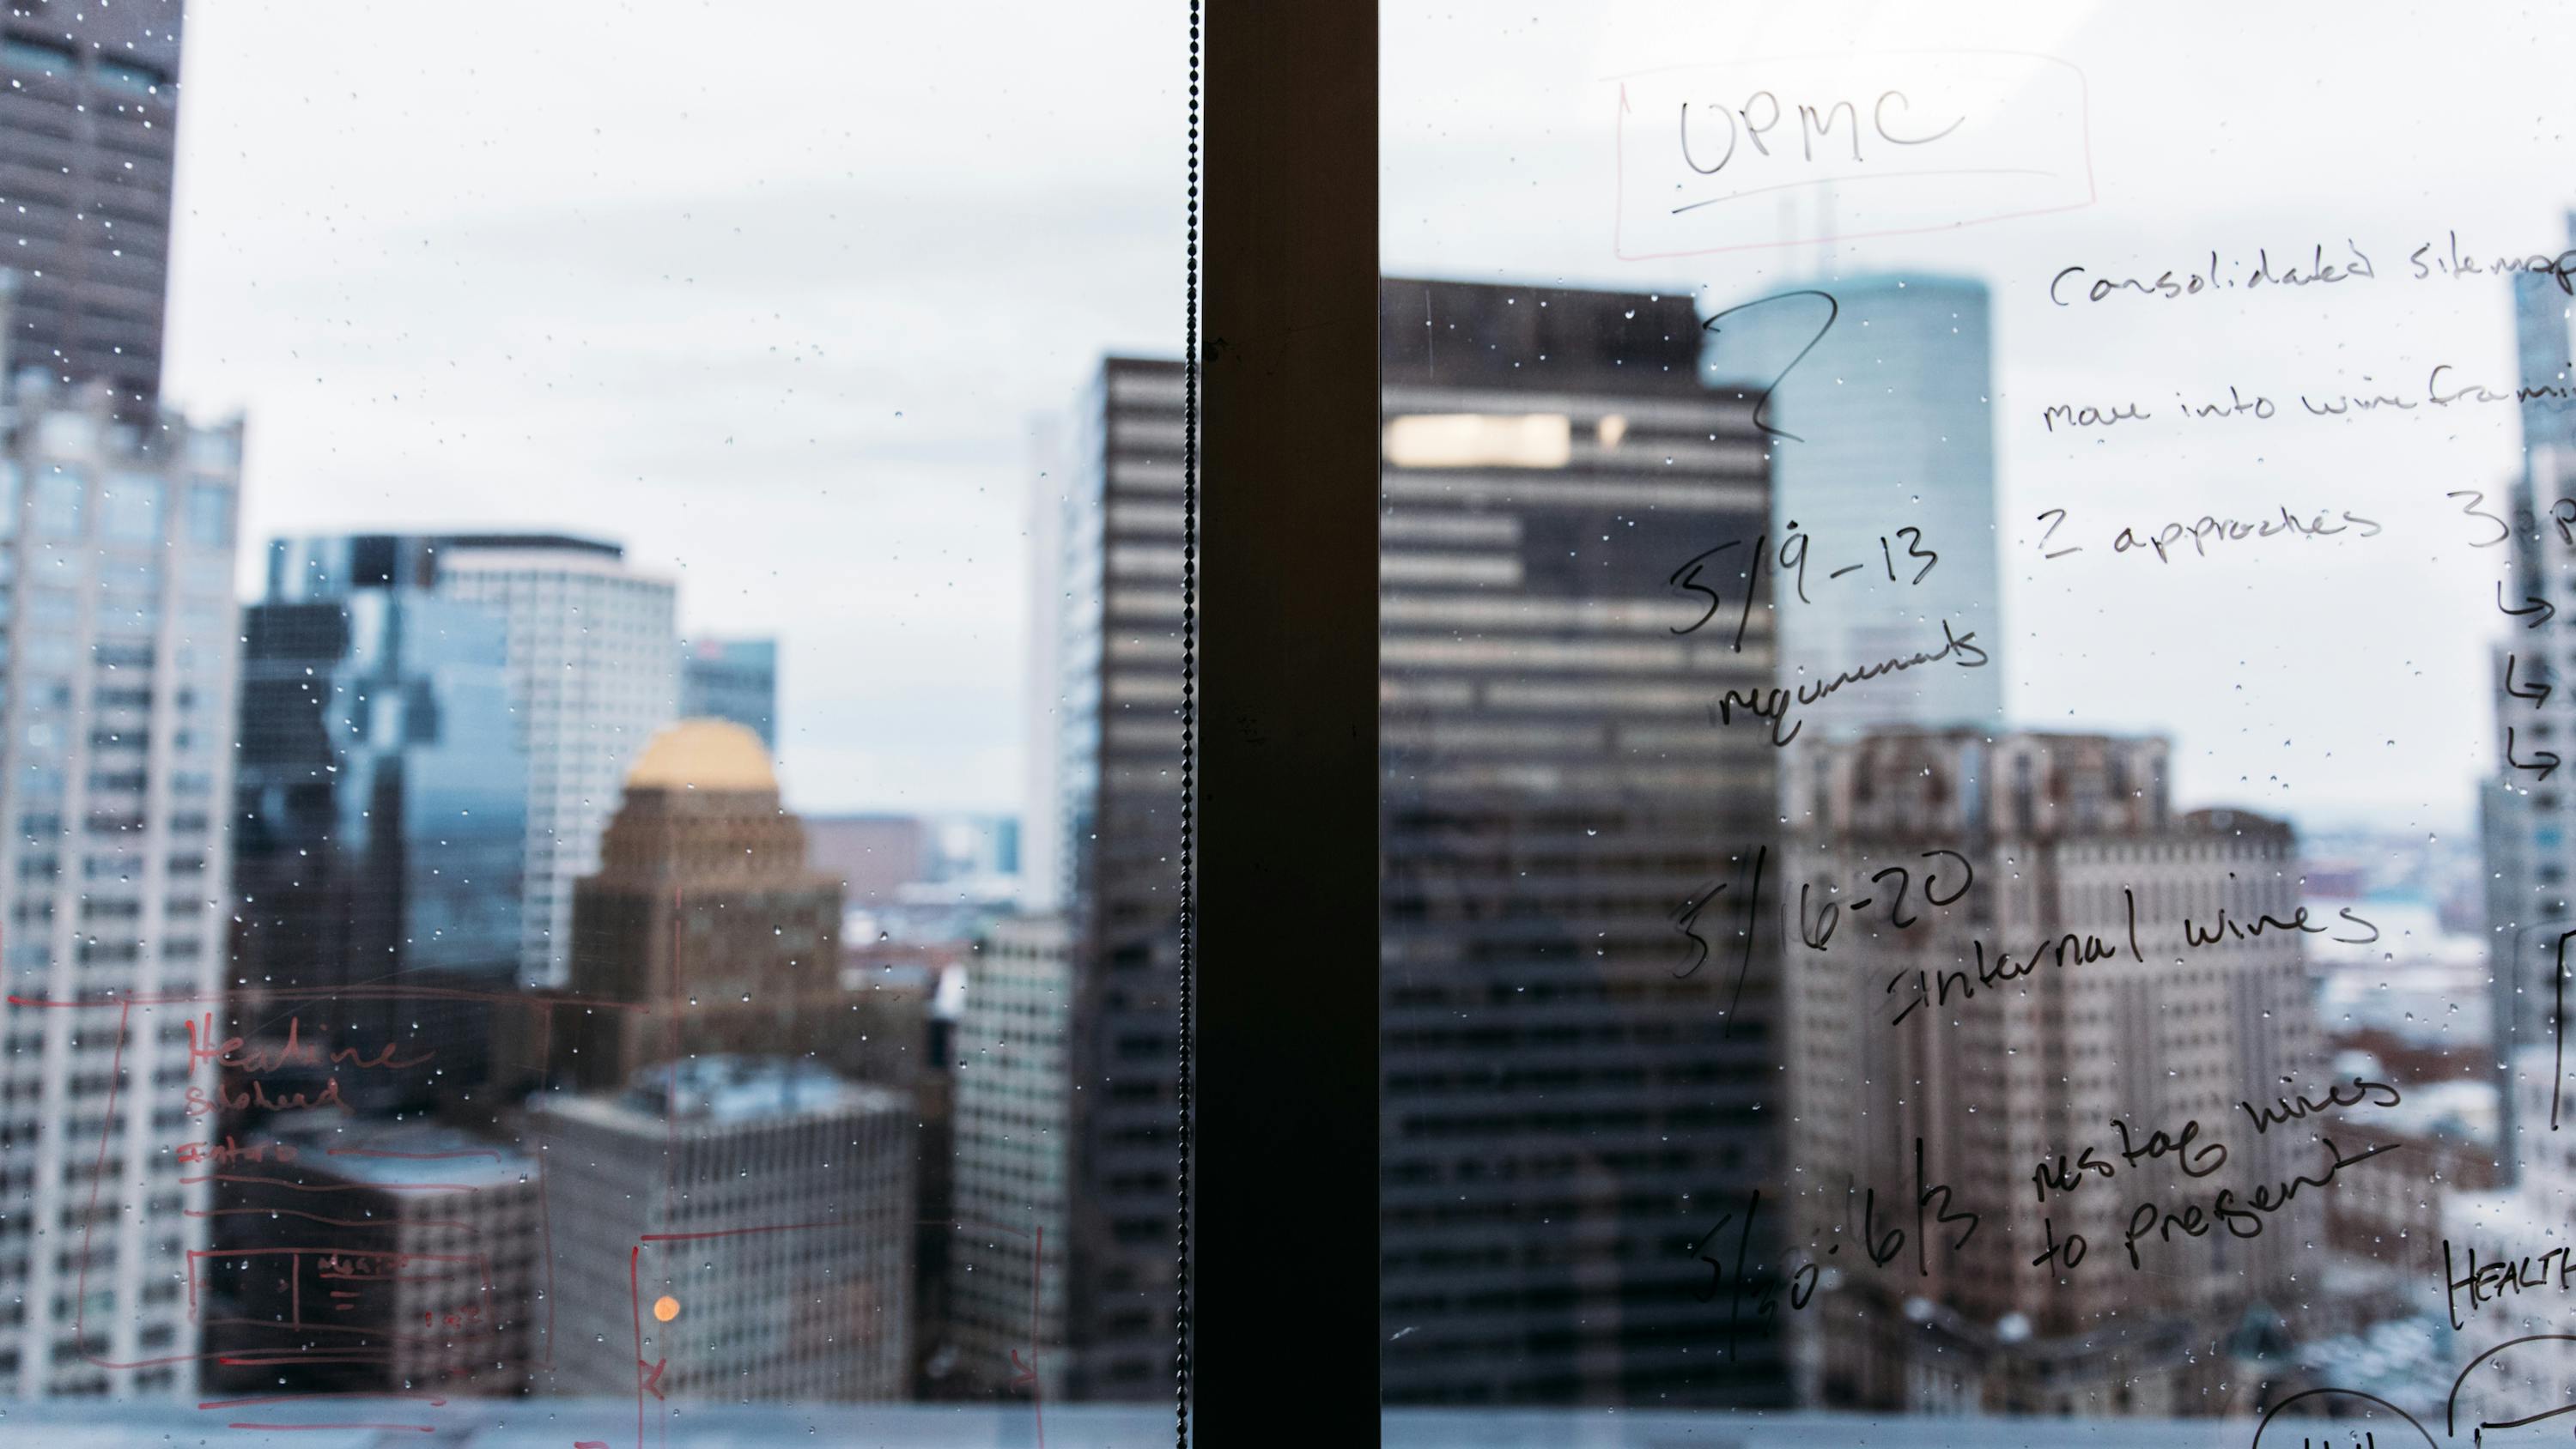 A window with dry erase marker writing on it overlooking a city